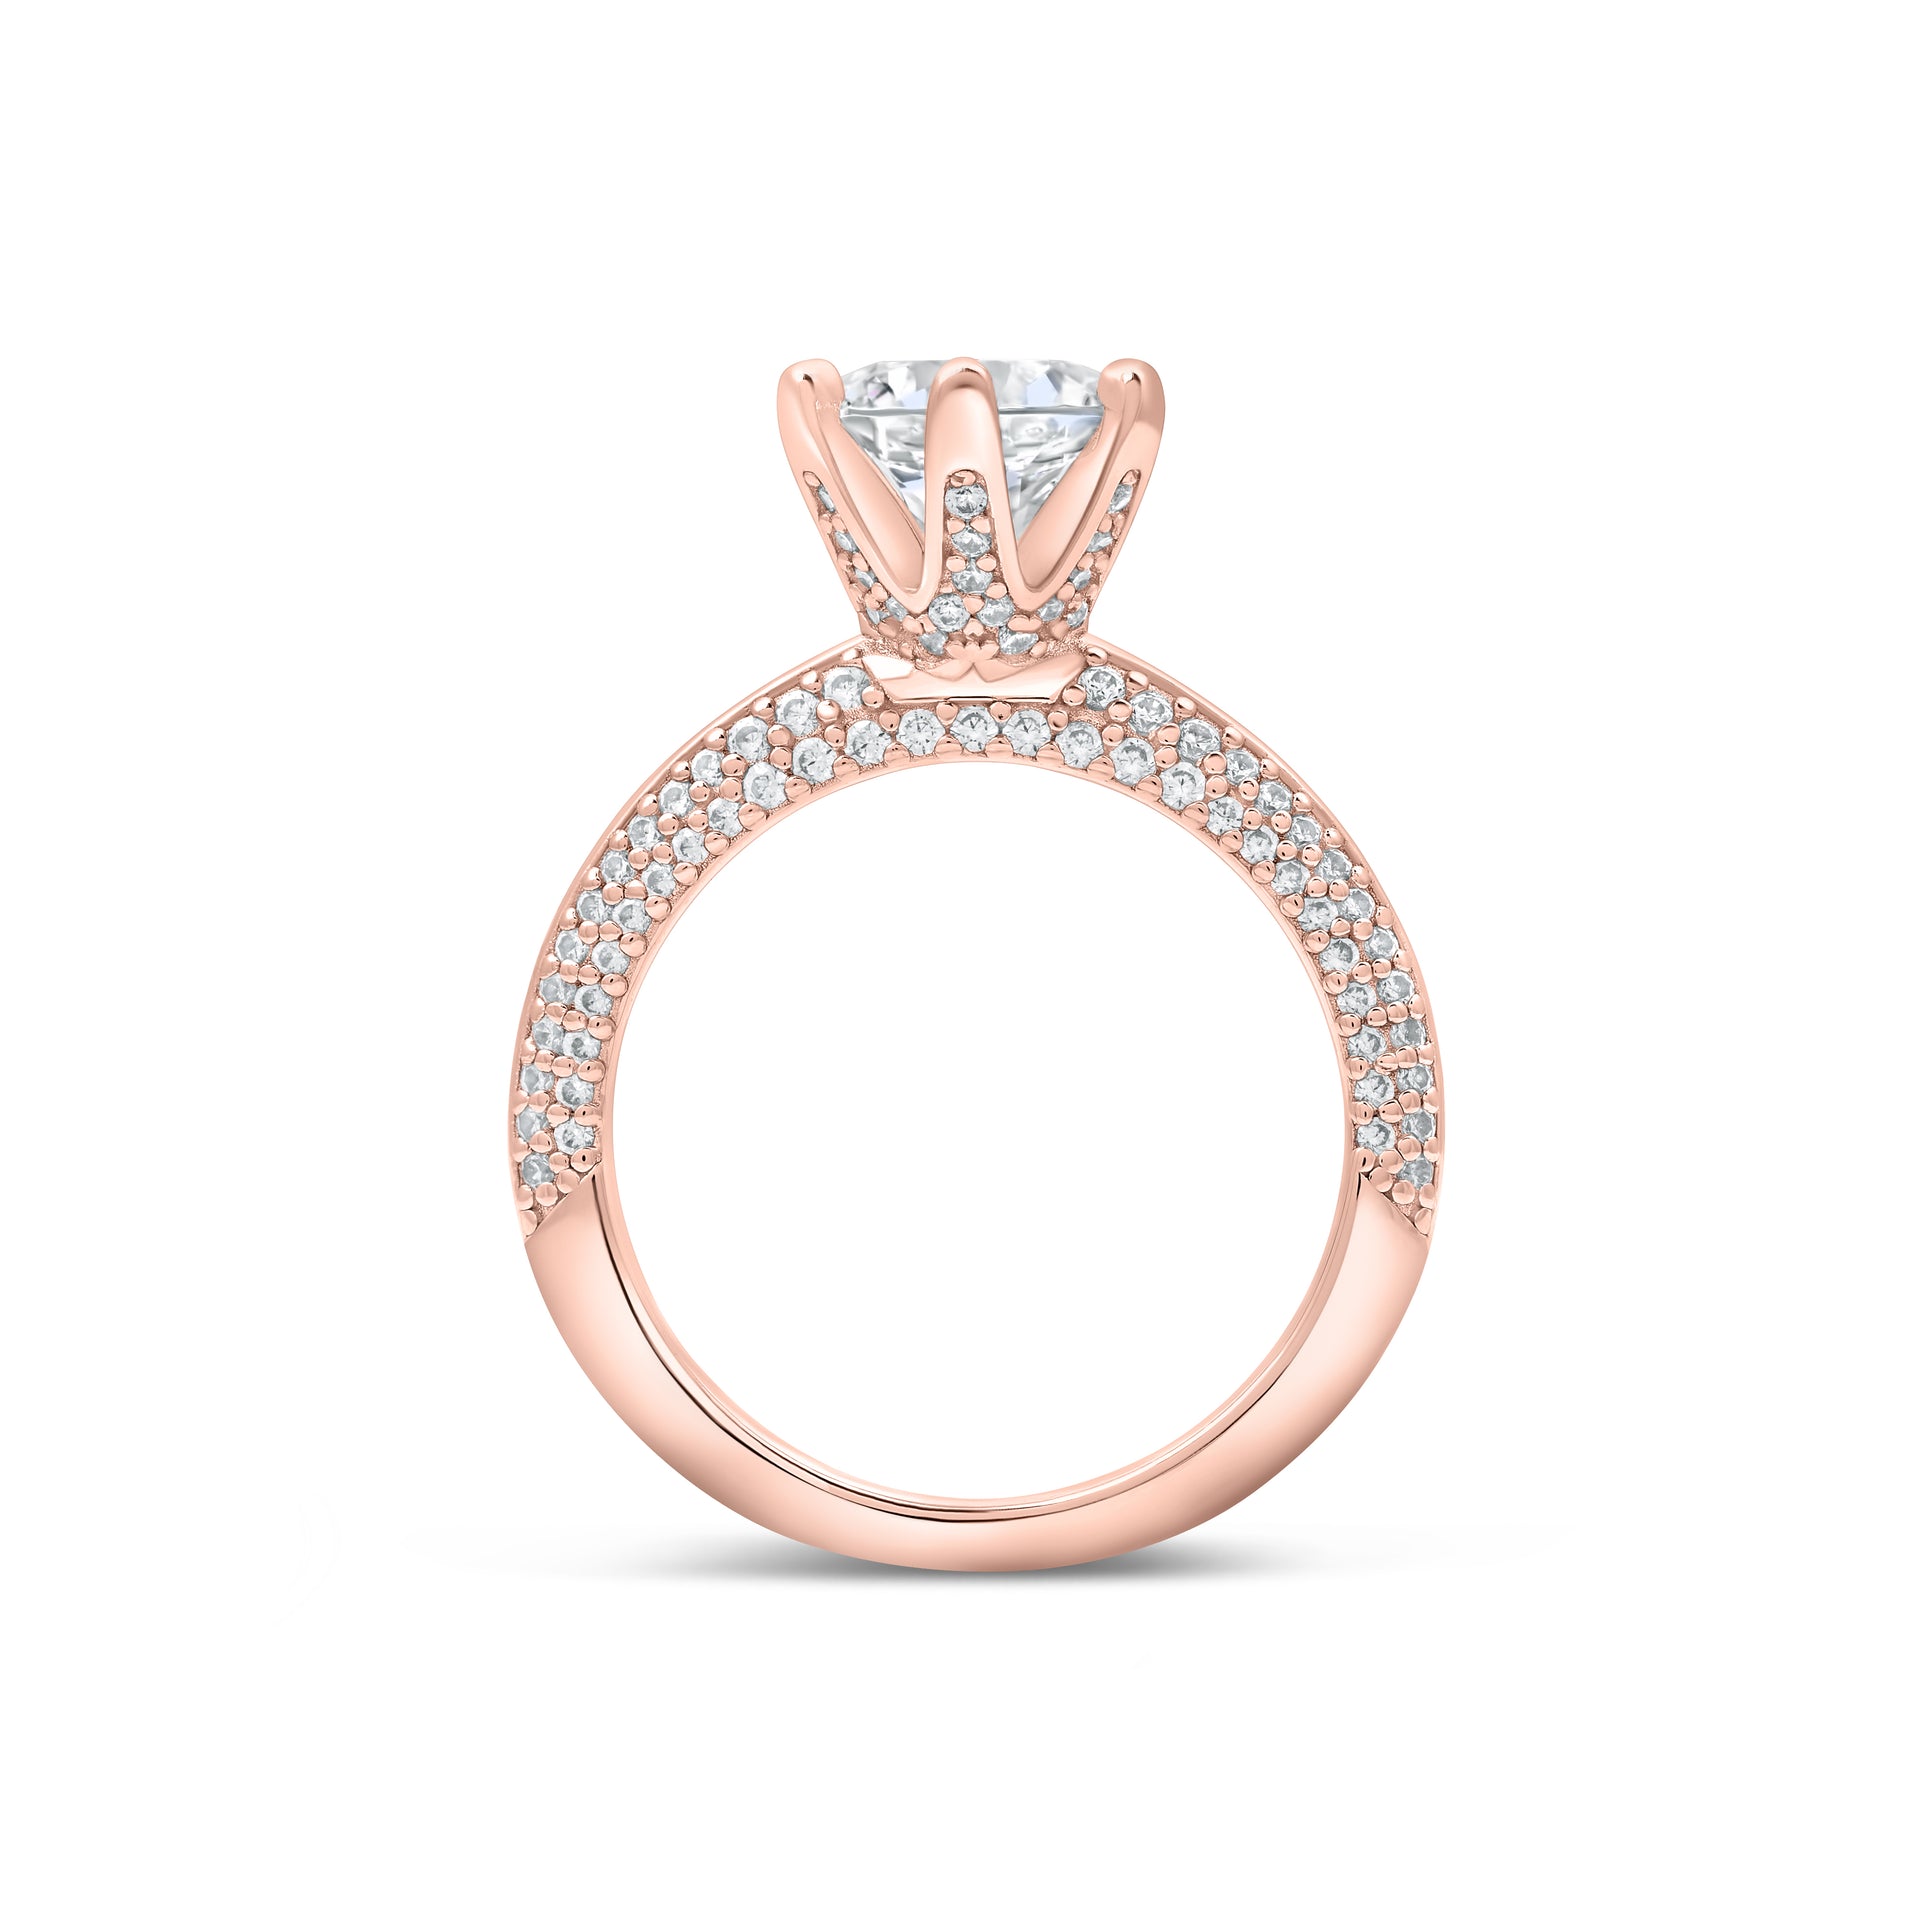 Vintage rose gold engagement ring with a half eternity style band